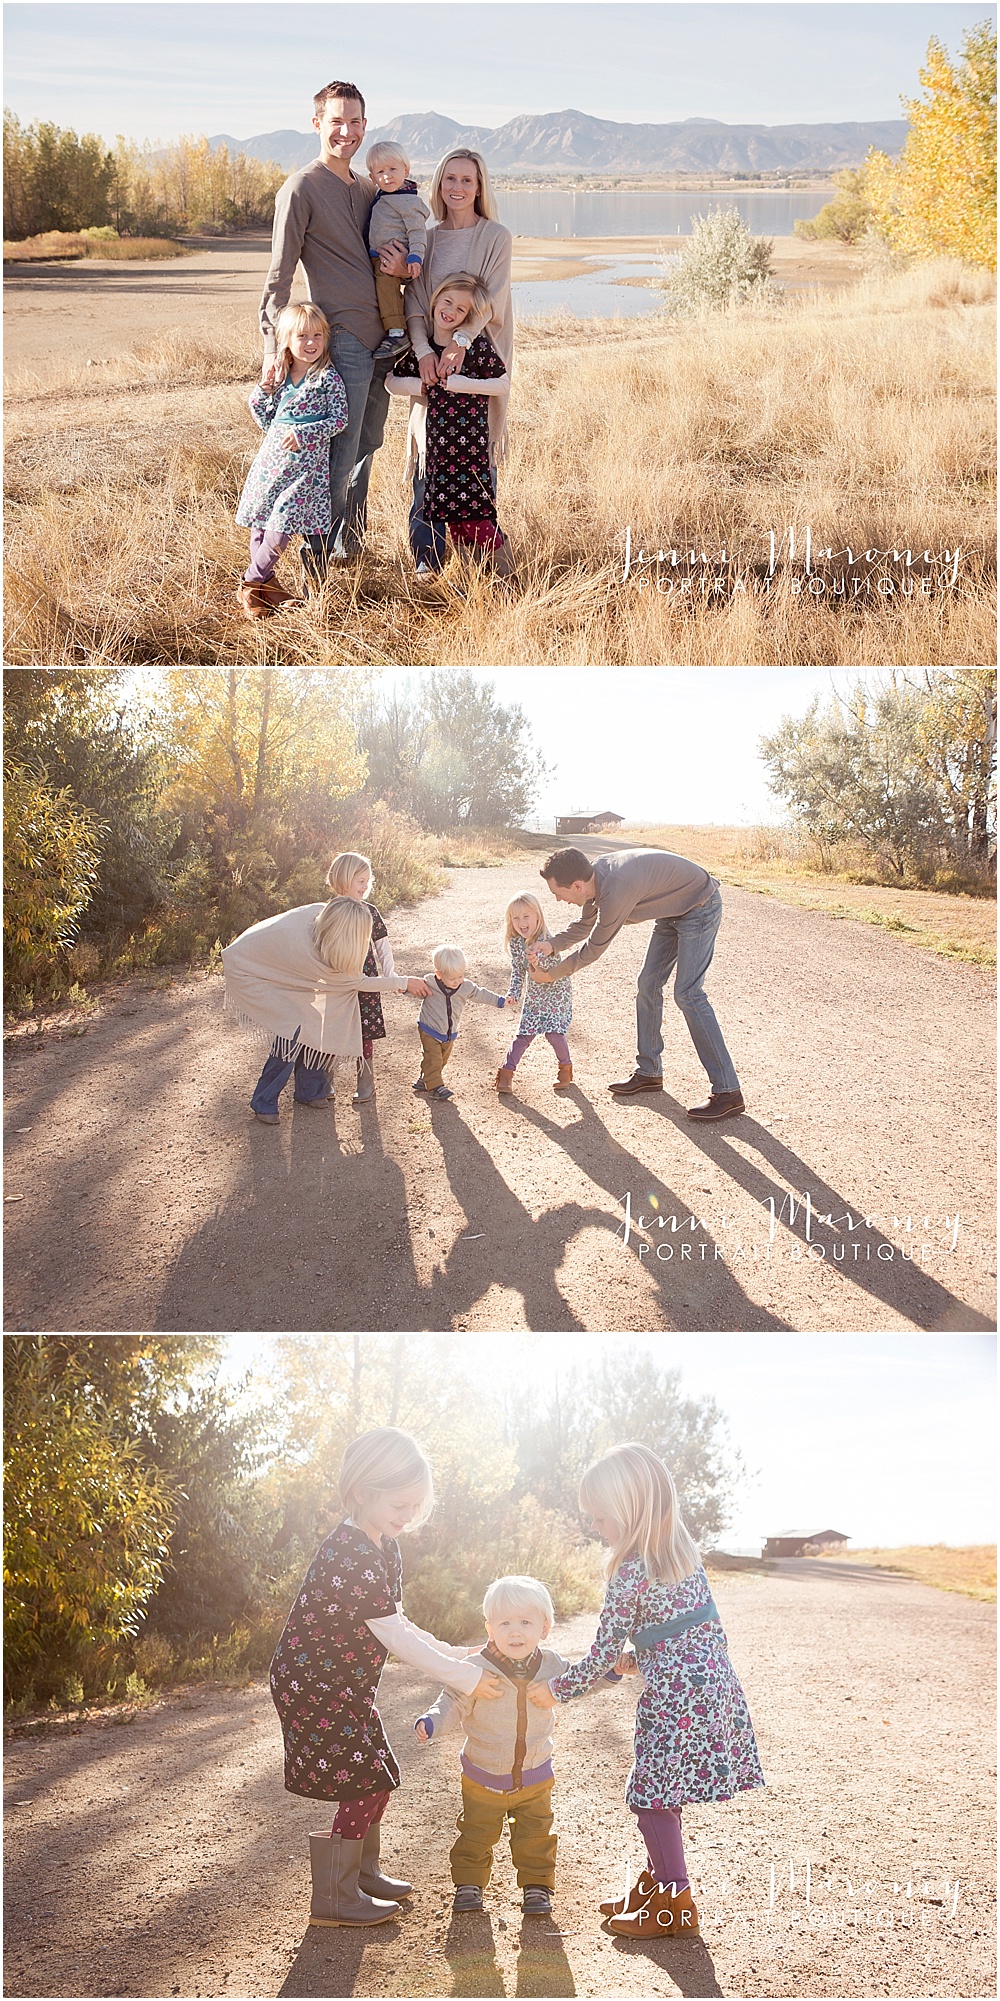 Outdoor, sunny, Boulder Colorado family photography session with photographer Jenni Maroney. 